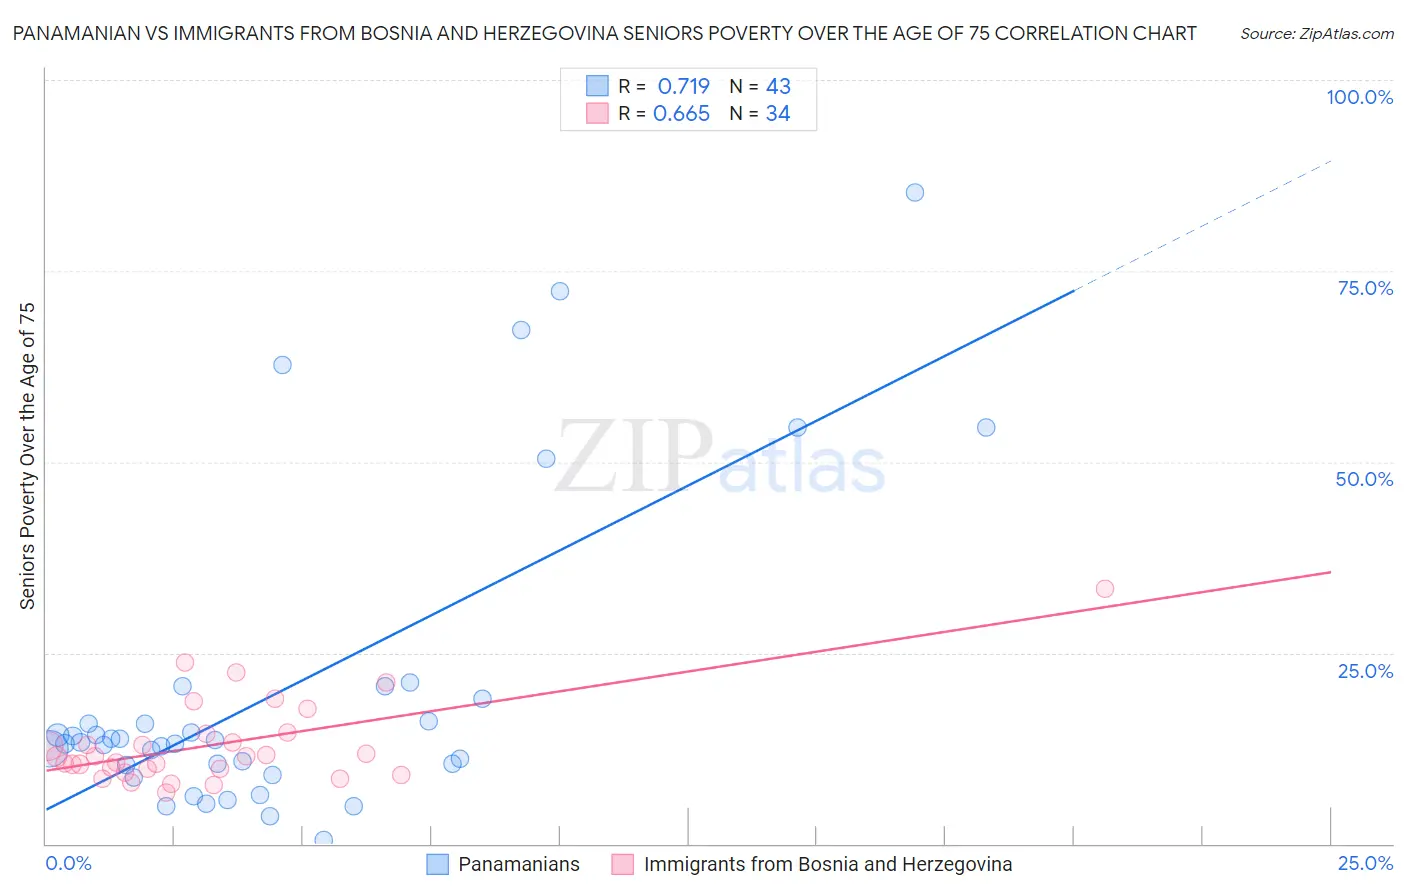 Panamanian vs Immigrants from Bosnia and Herzegovina Seniors Poverty Over the Age of 75